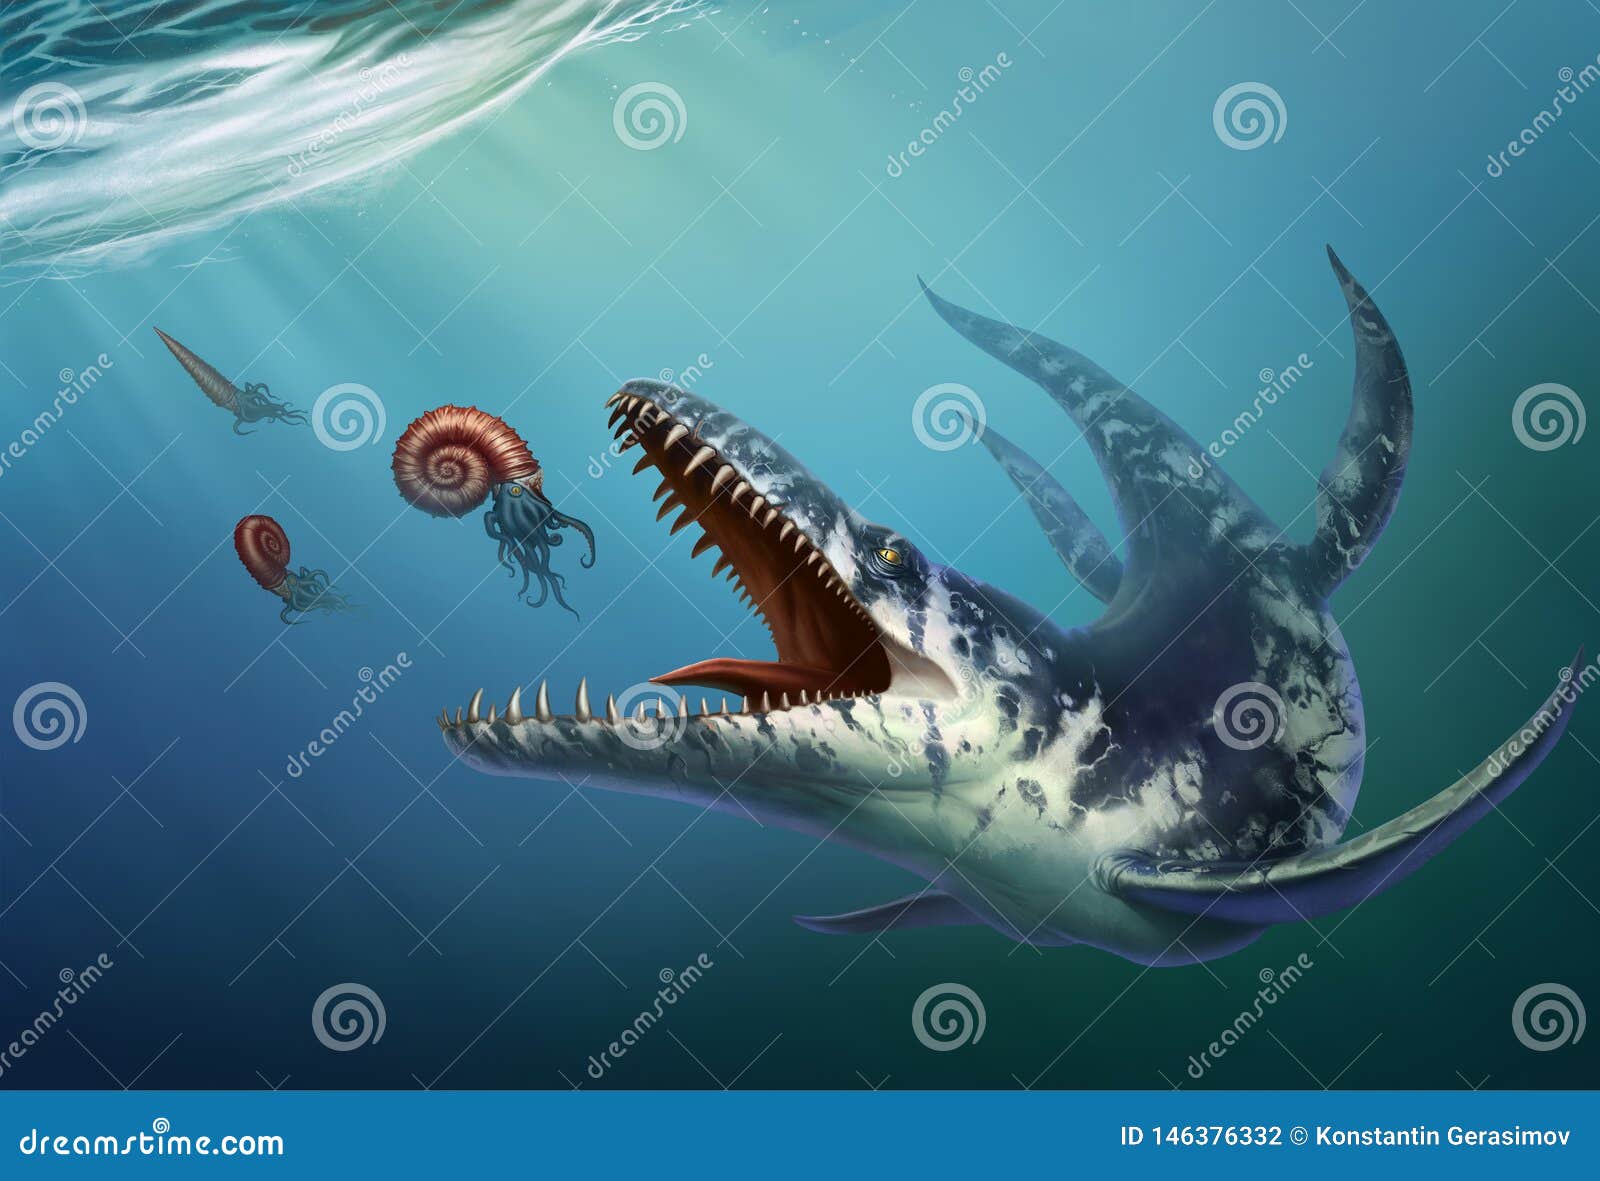 kronosaurus was a marine reptile that lived in the ocean